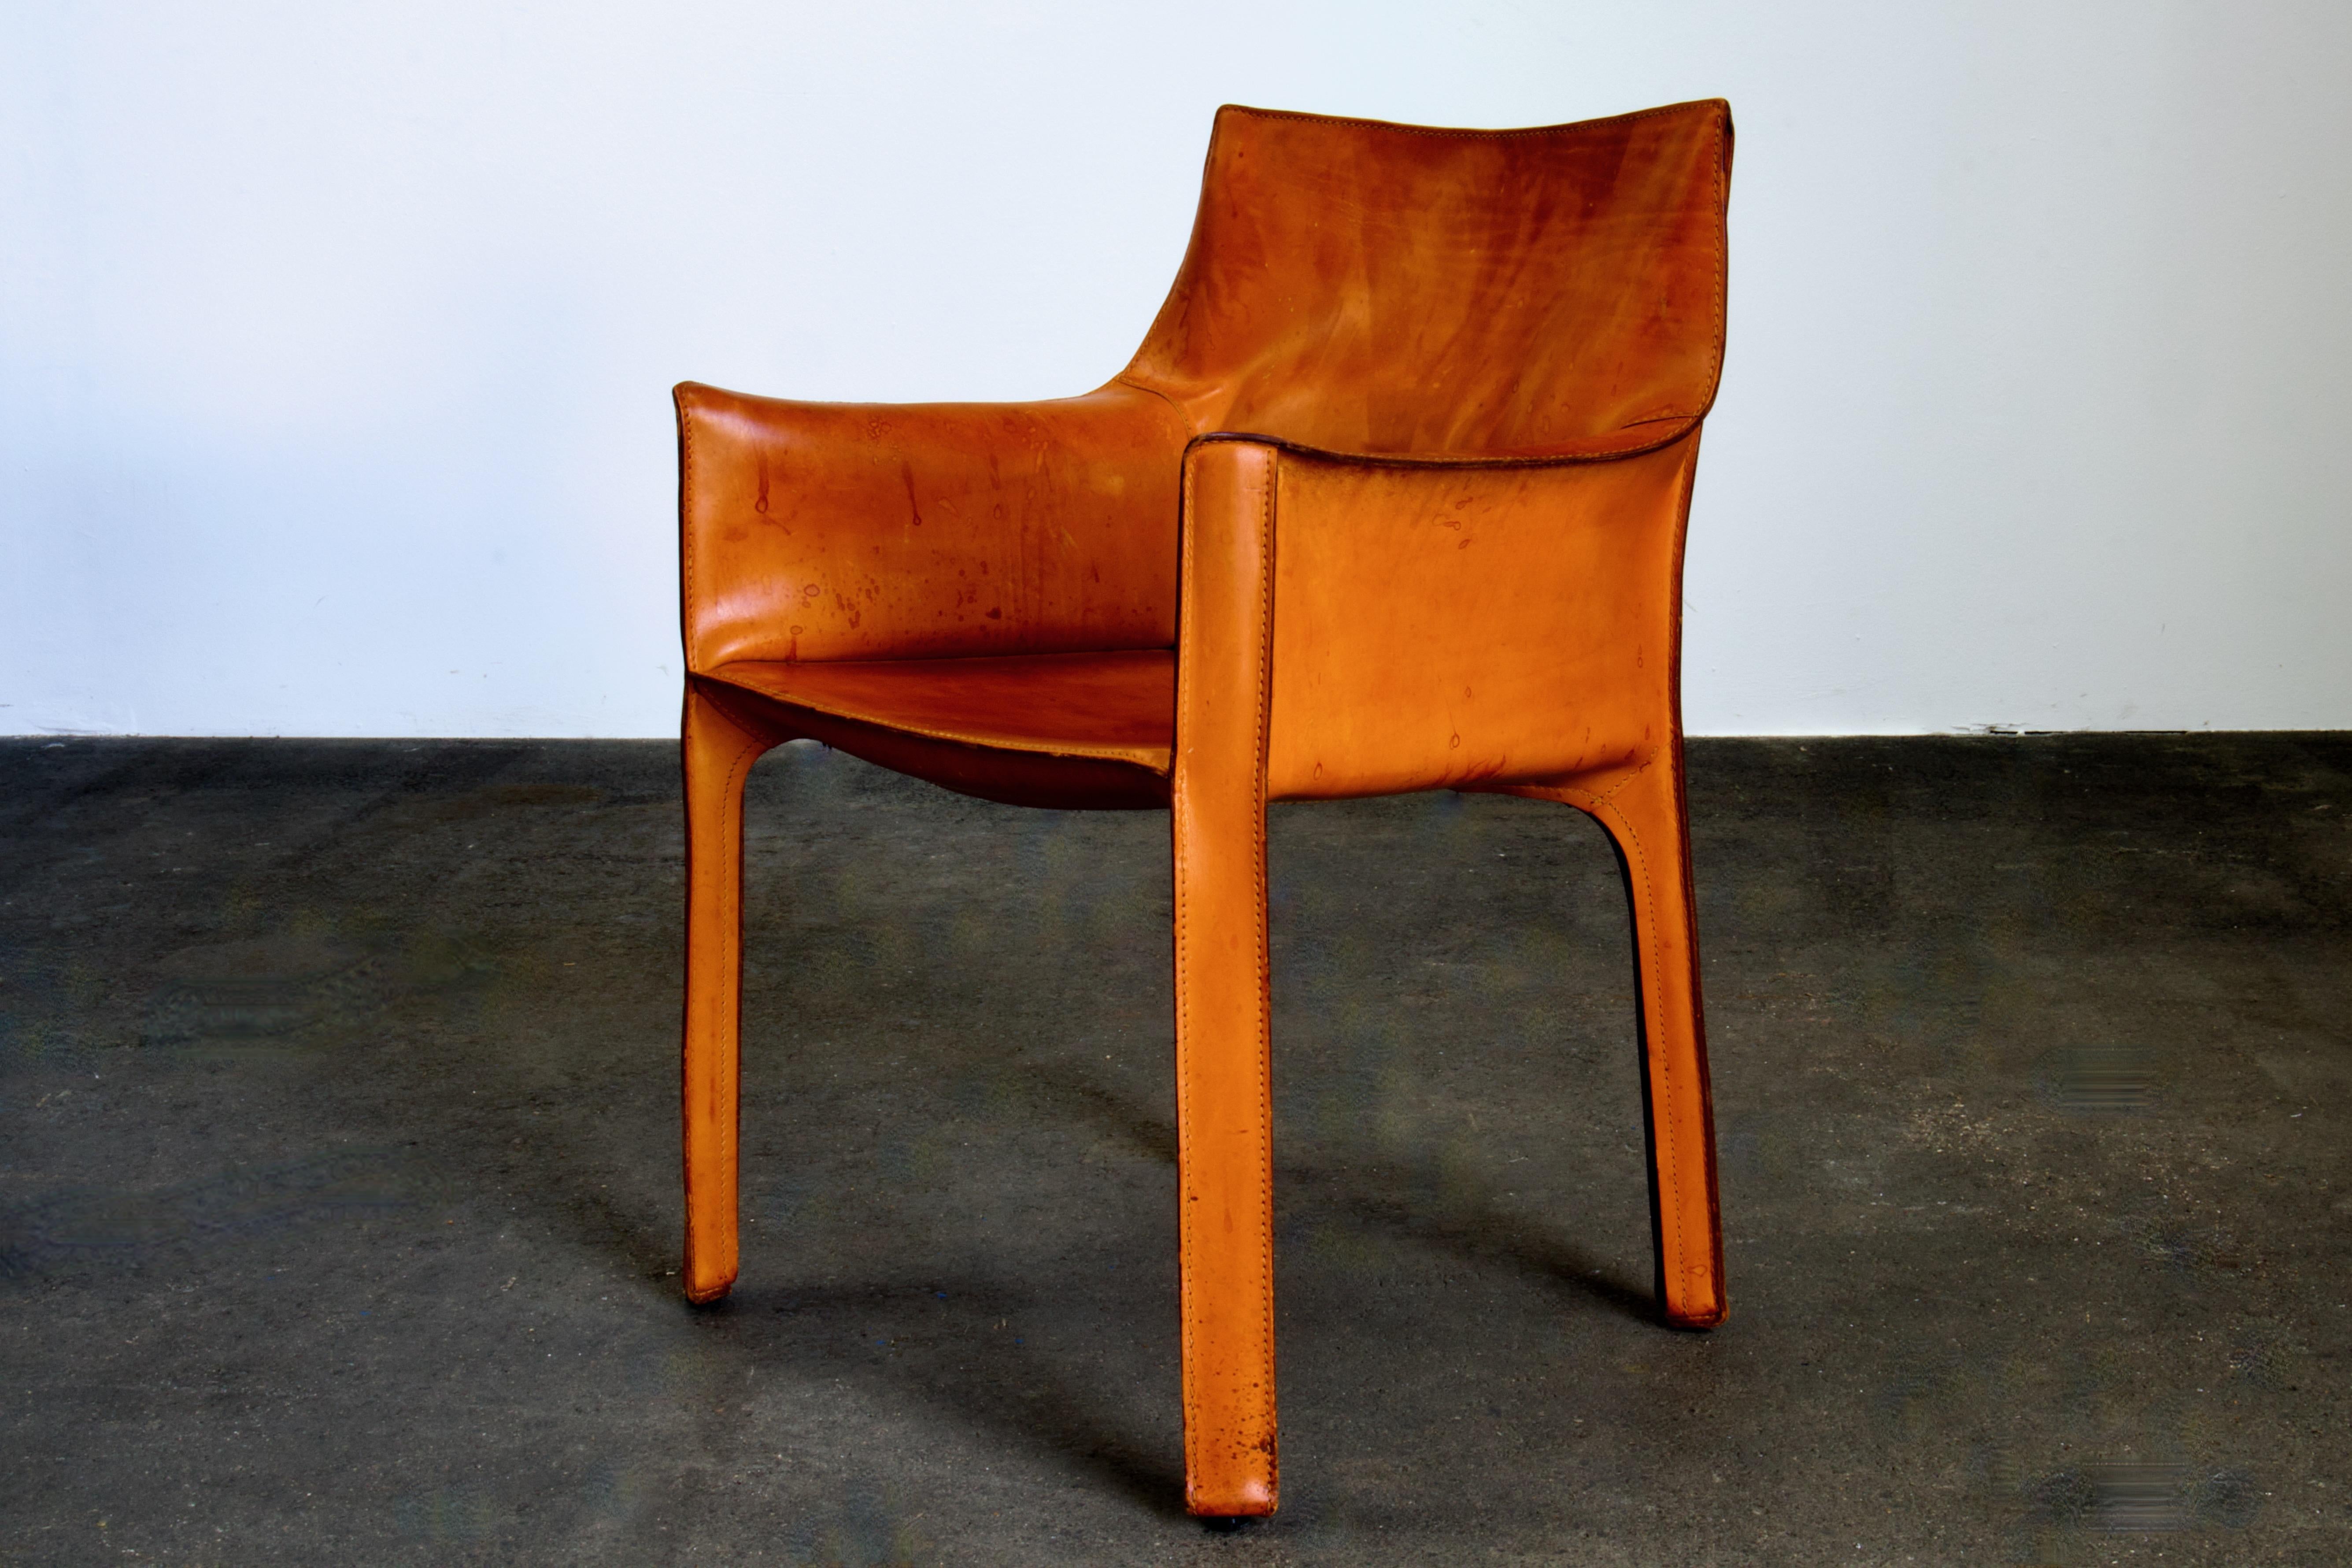 Italian Patinated Bellini CAB 413 Armchair in Vintage Cognac Saddle Leather for Cassina